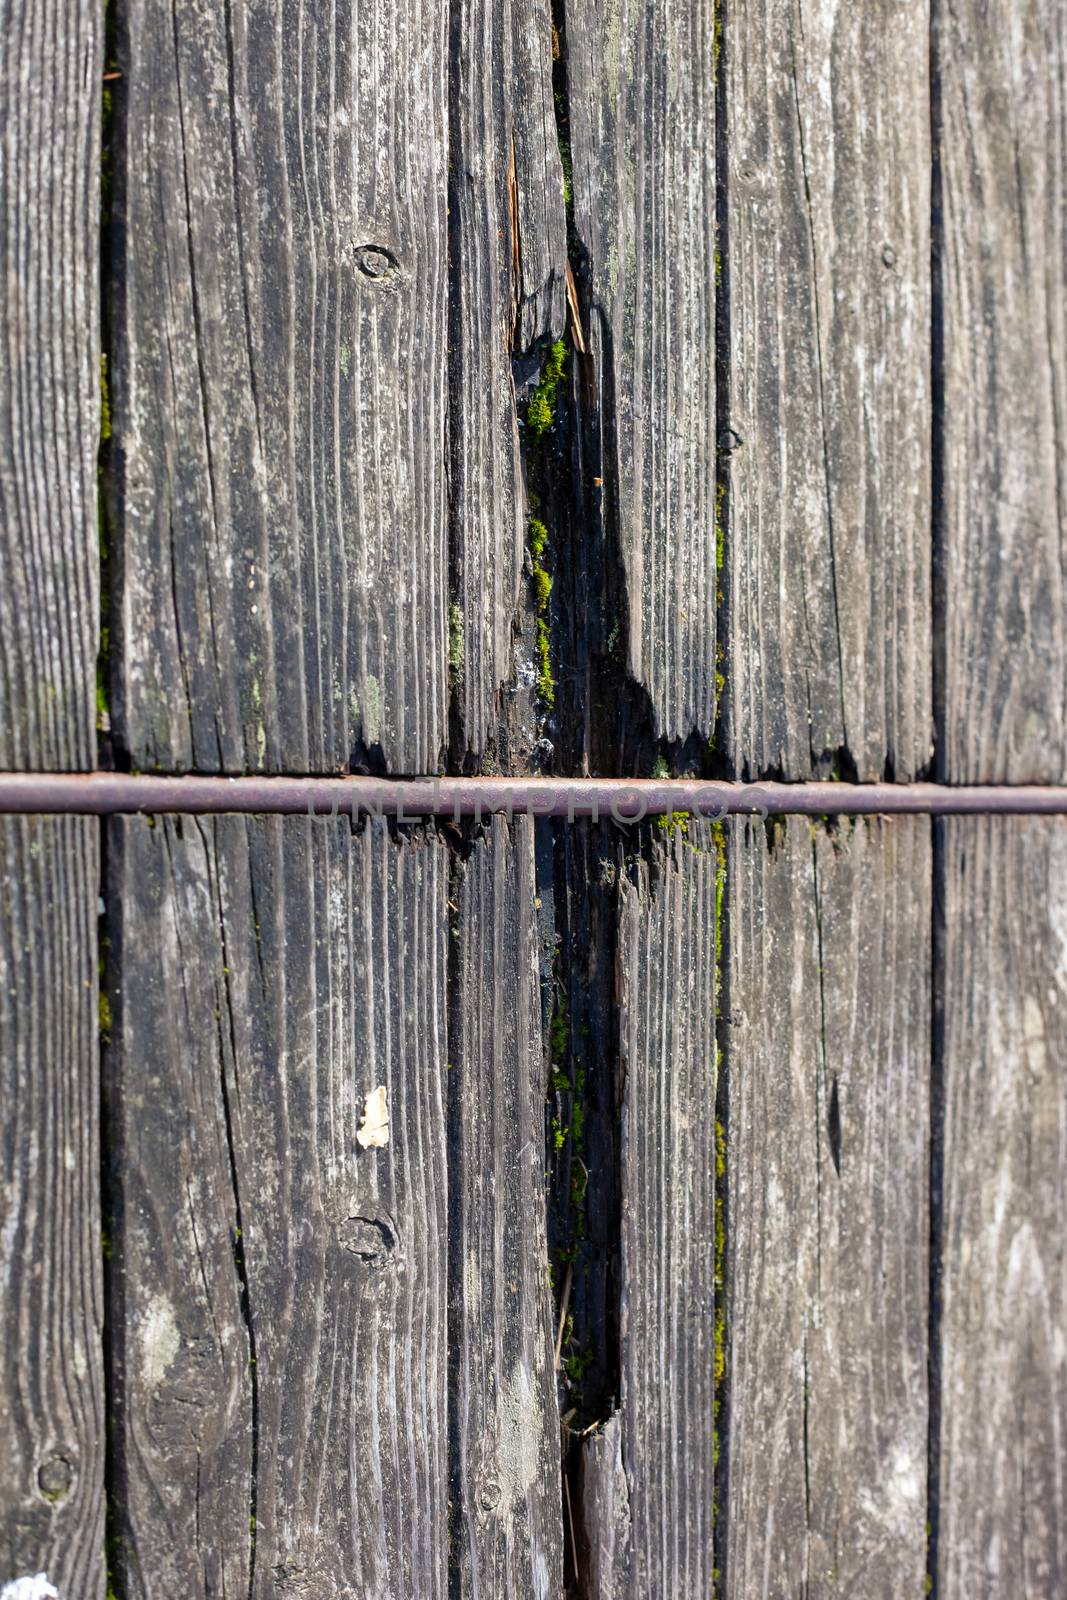 Detailed close up view on different wood surfaces showing planks logs and wooden doors in high resolution